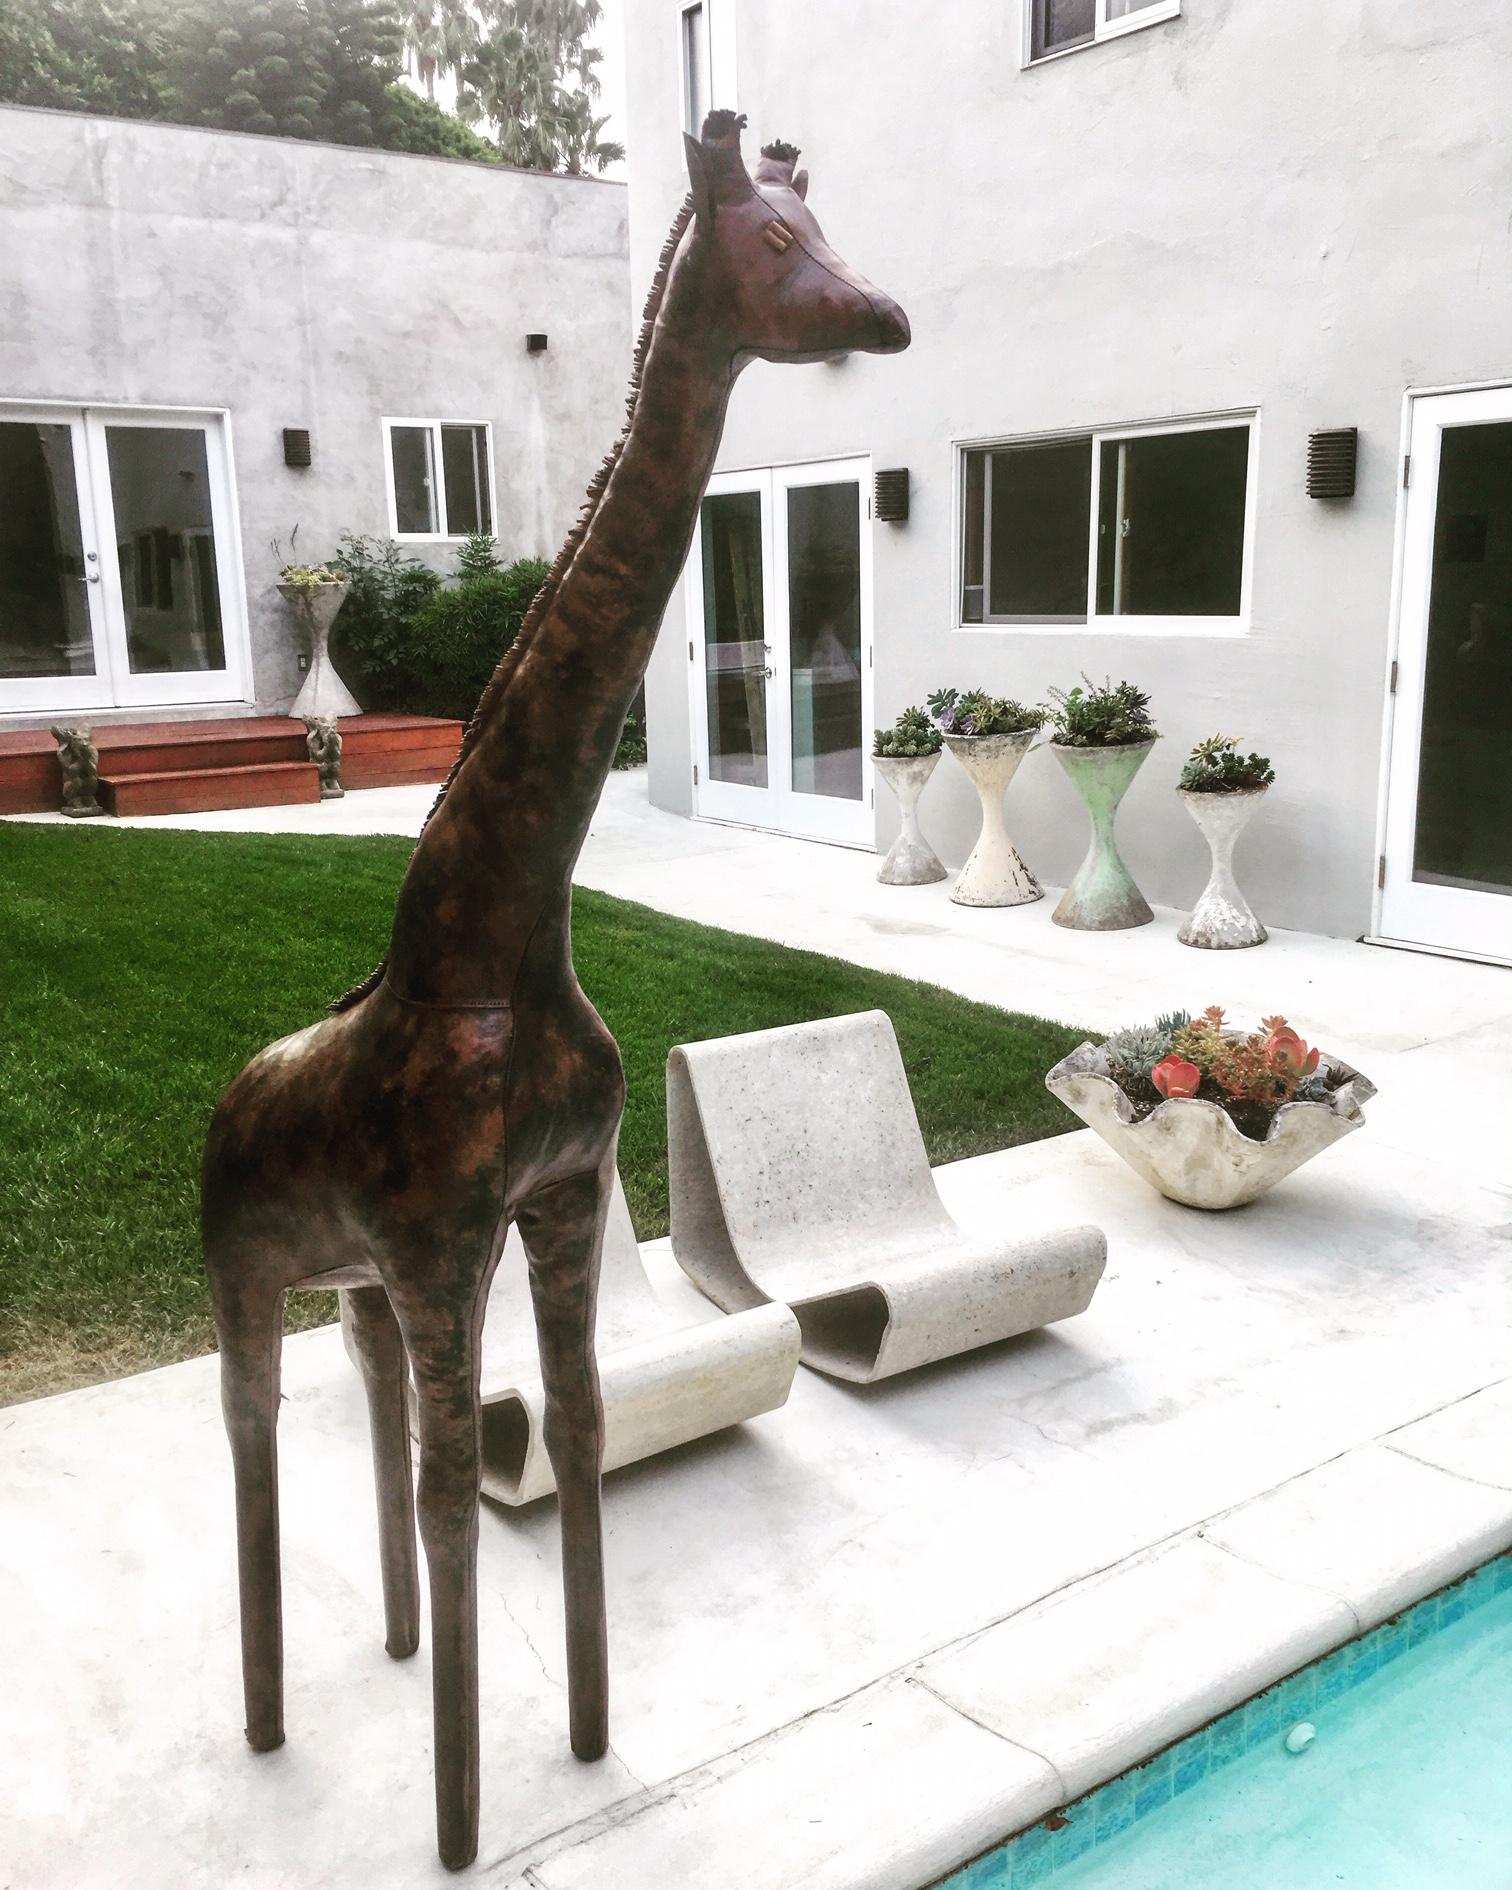 Stunning leather giraffe by Omersa. 6 feet tall! Handmade in England in the 1960s only giraffe this size listed for sale anywhere. Excellent condition. Gorgeous standalone sculpture.